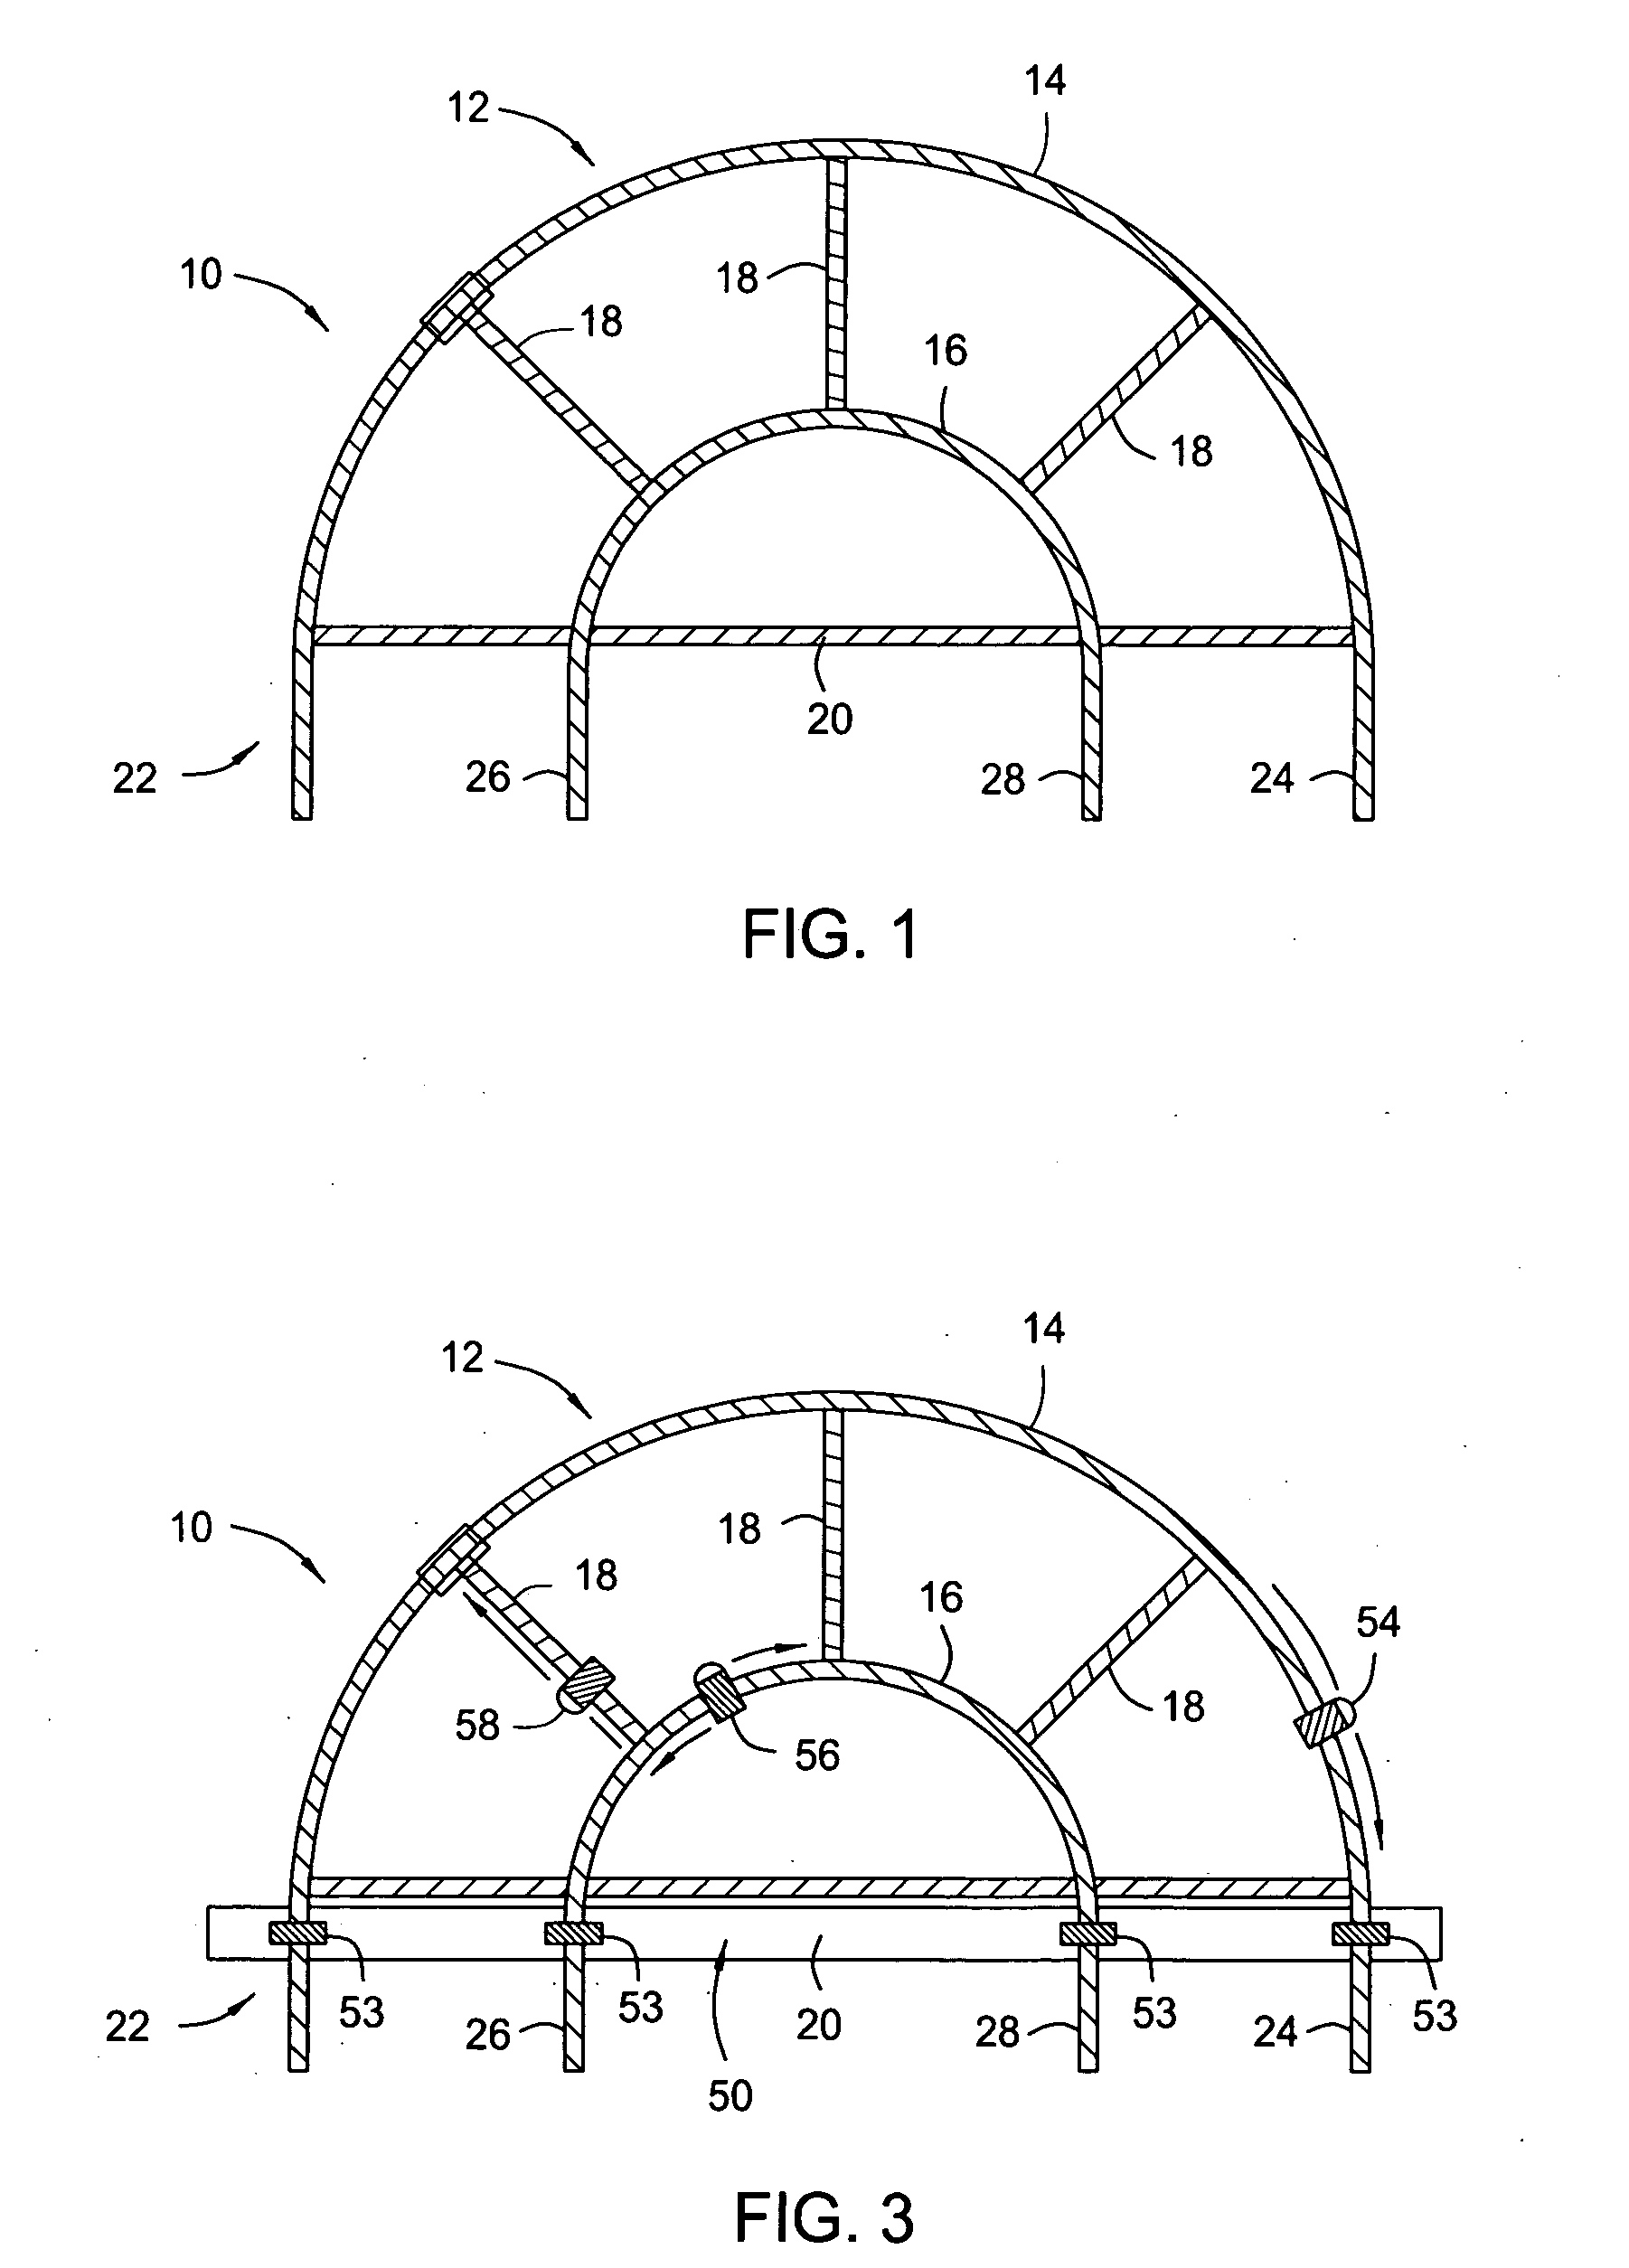 System, kit and apparatus for attachment of external fixators for bone realignment